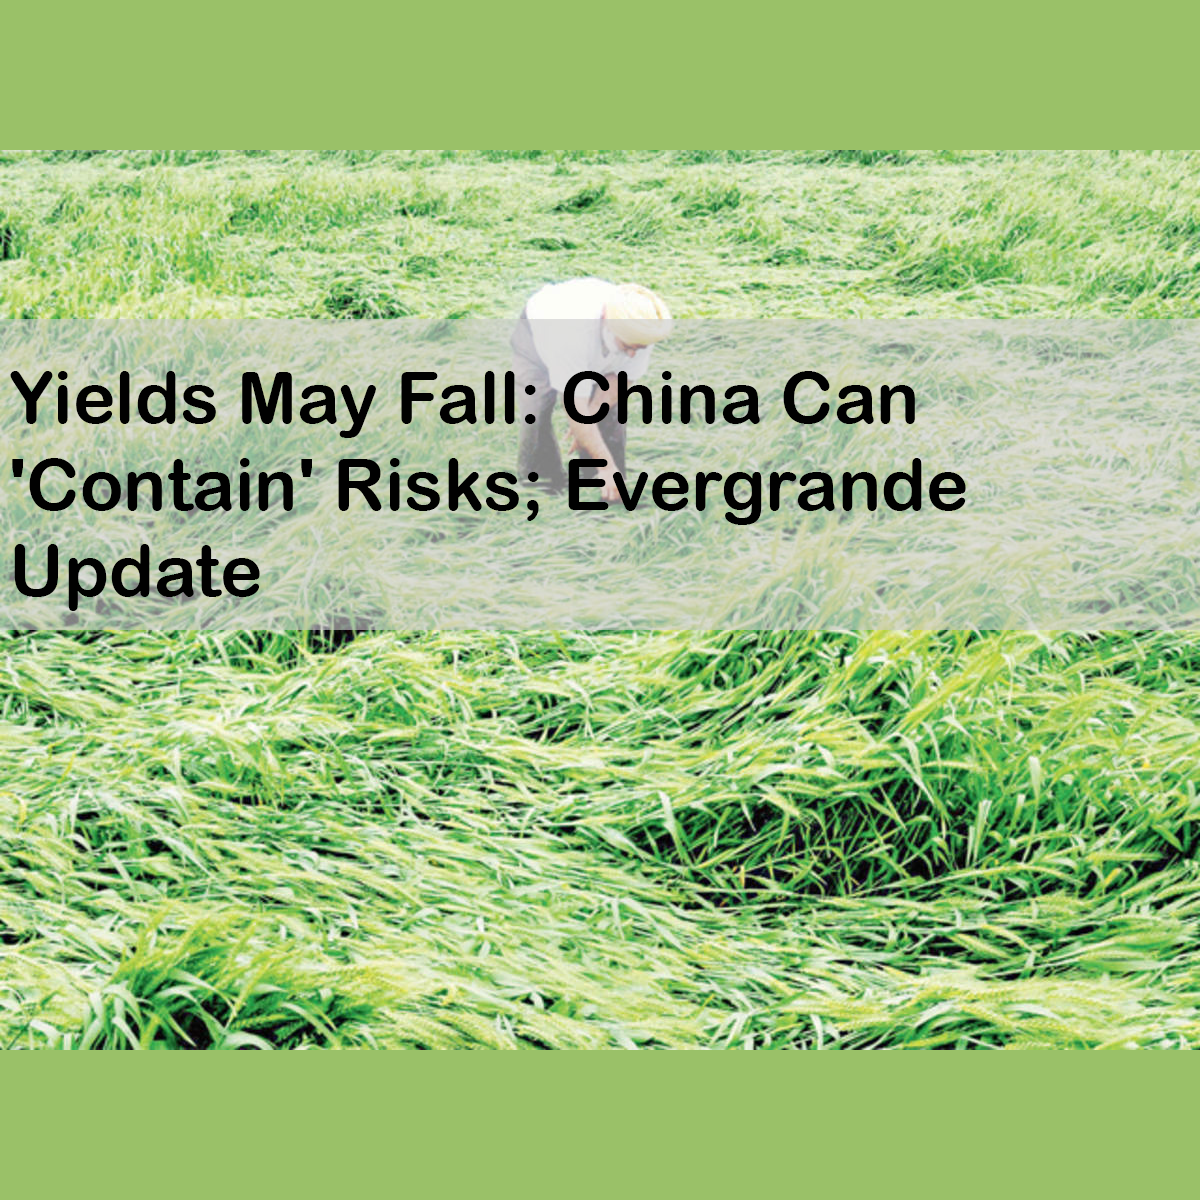 Yields May Fall: China Can 'Contain' Risks; Evergrande Update